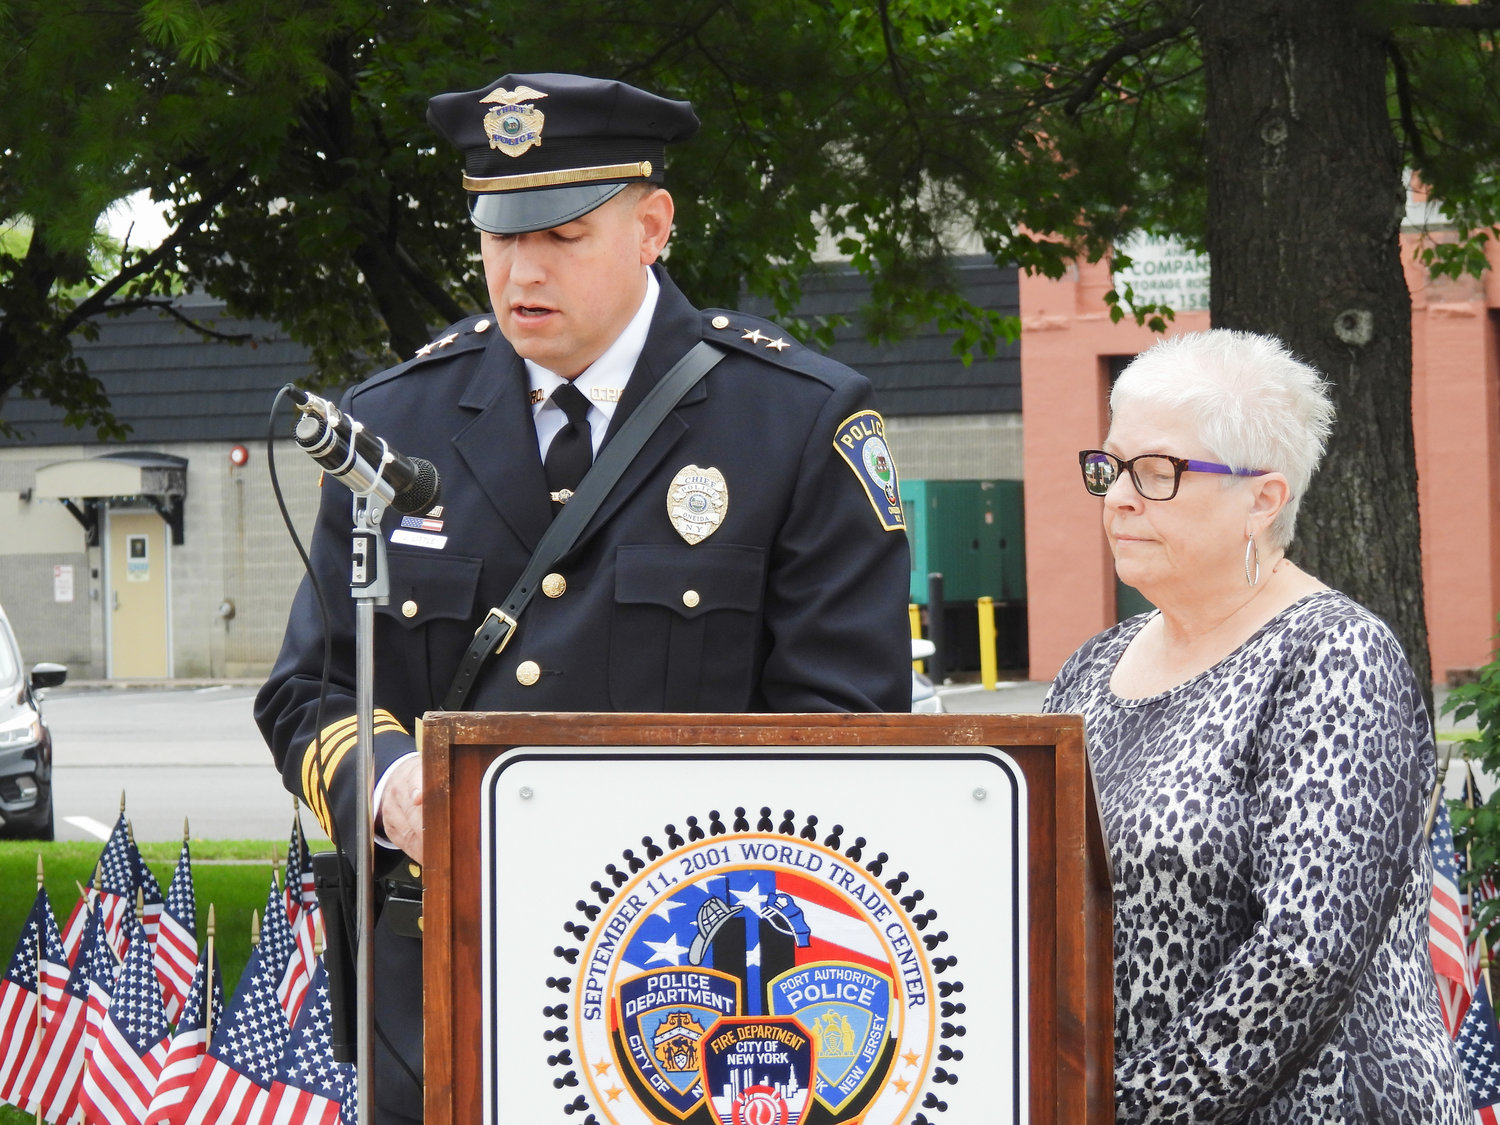 Oneida Police Chief John Little speaks at the city of Oneida's 9/11 Remembrance Ceremony on Sunday.